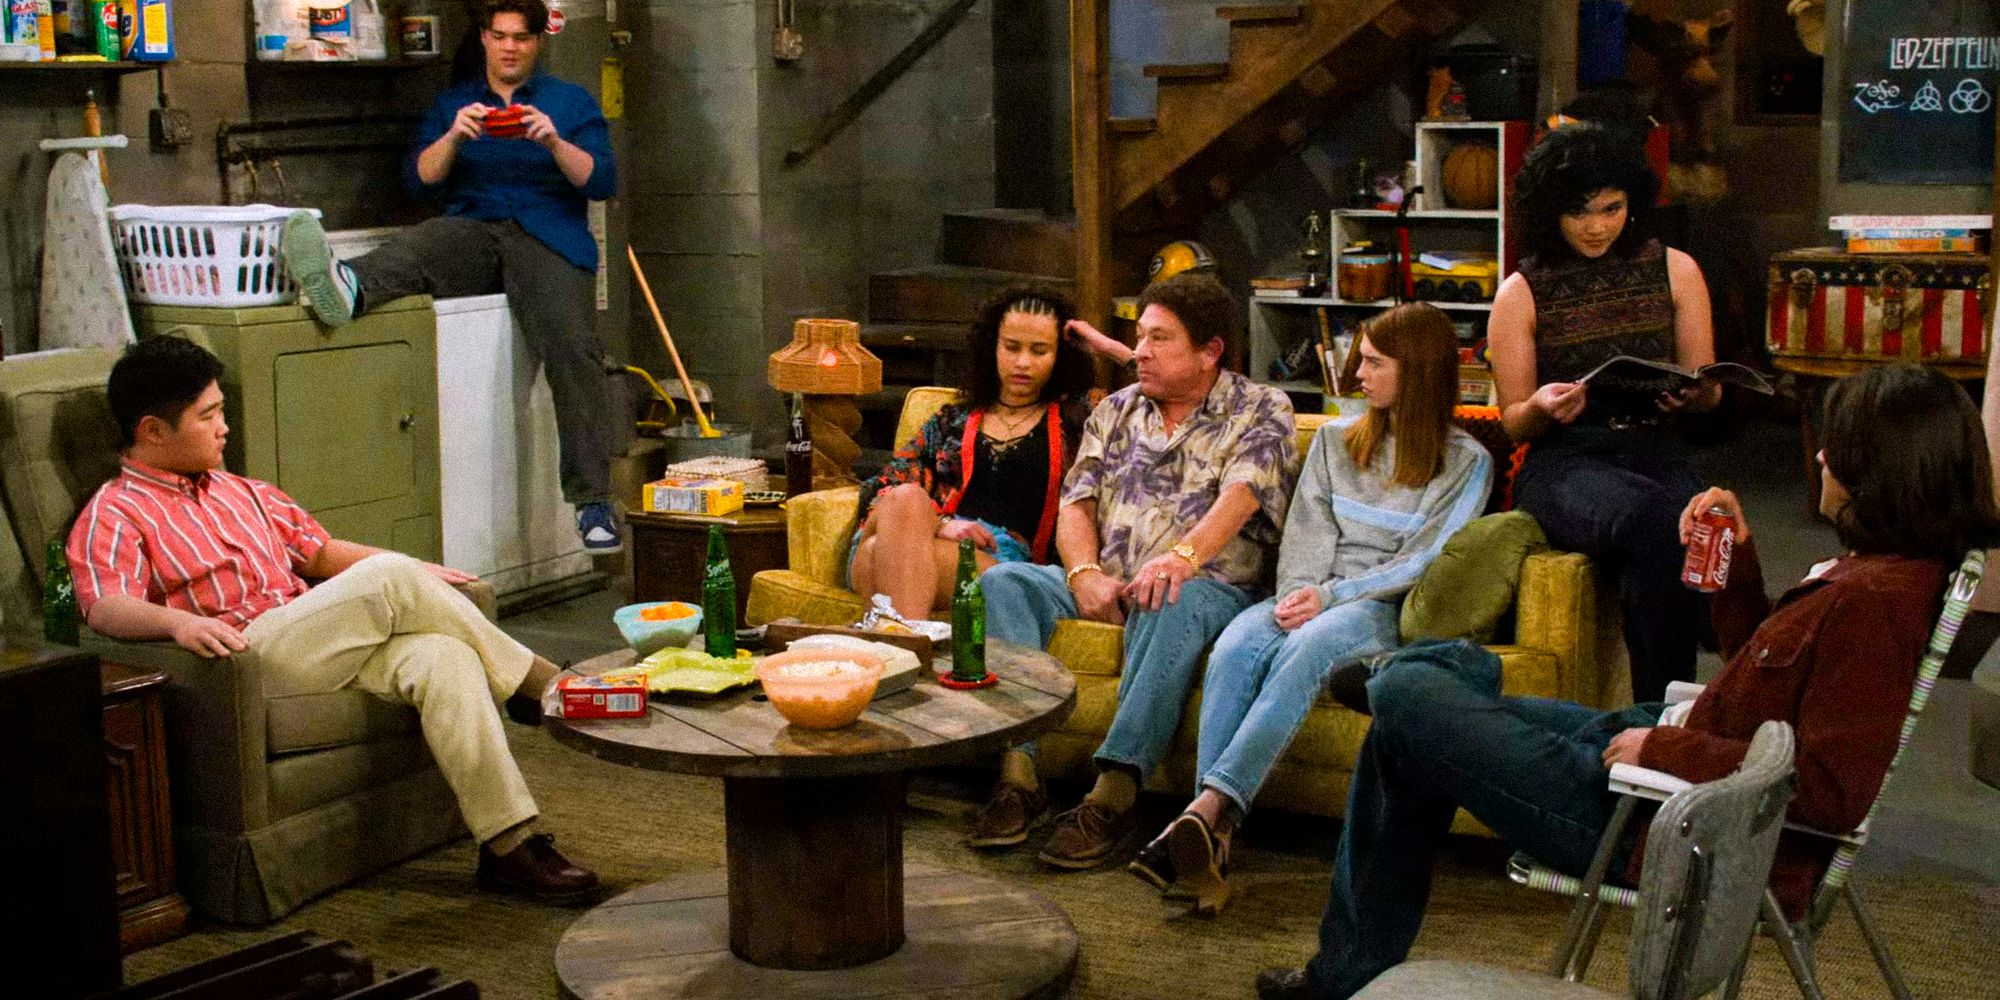 Bob (Don Stark), Leia (Callie Haverda), Gwen (Ashley Aufderheide) and the others hanging out in the basement in in That 90s show part 2